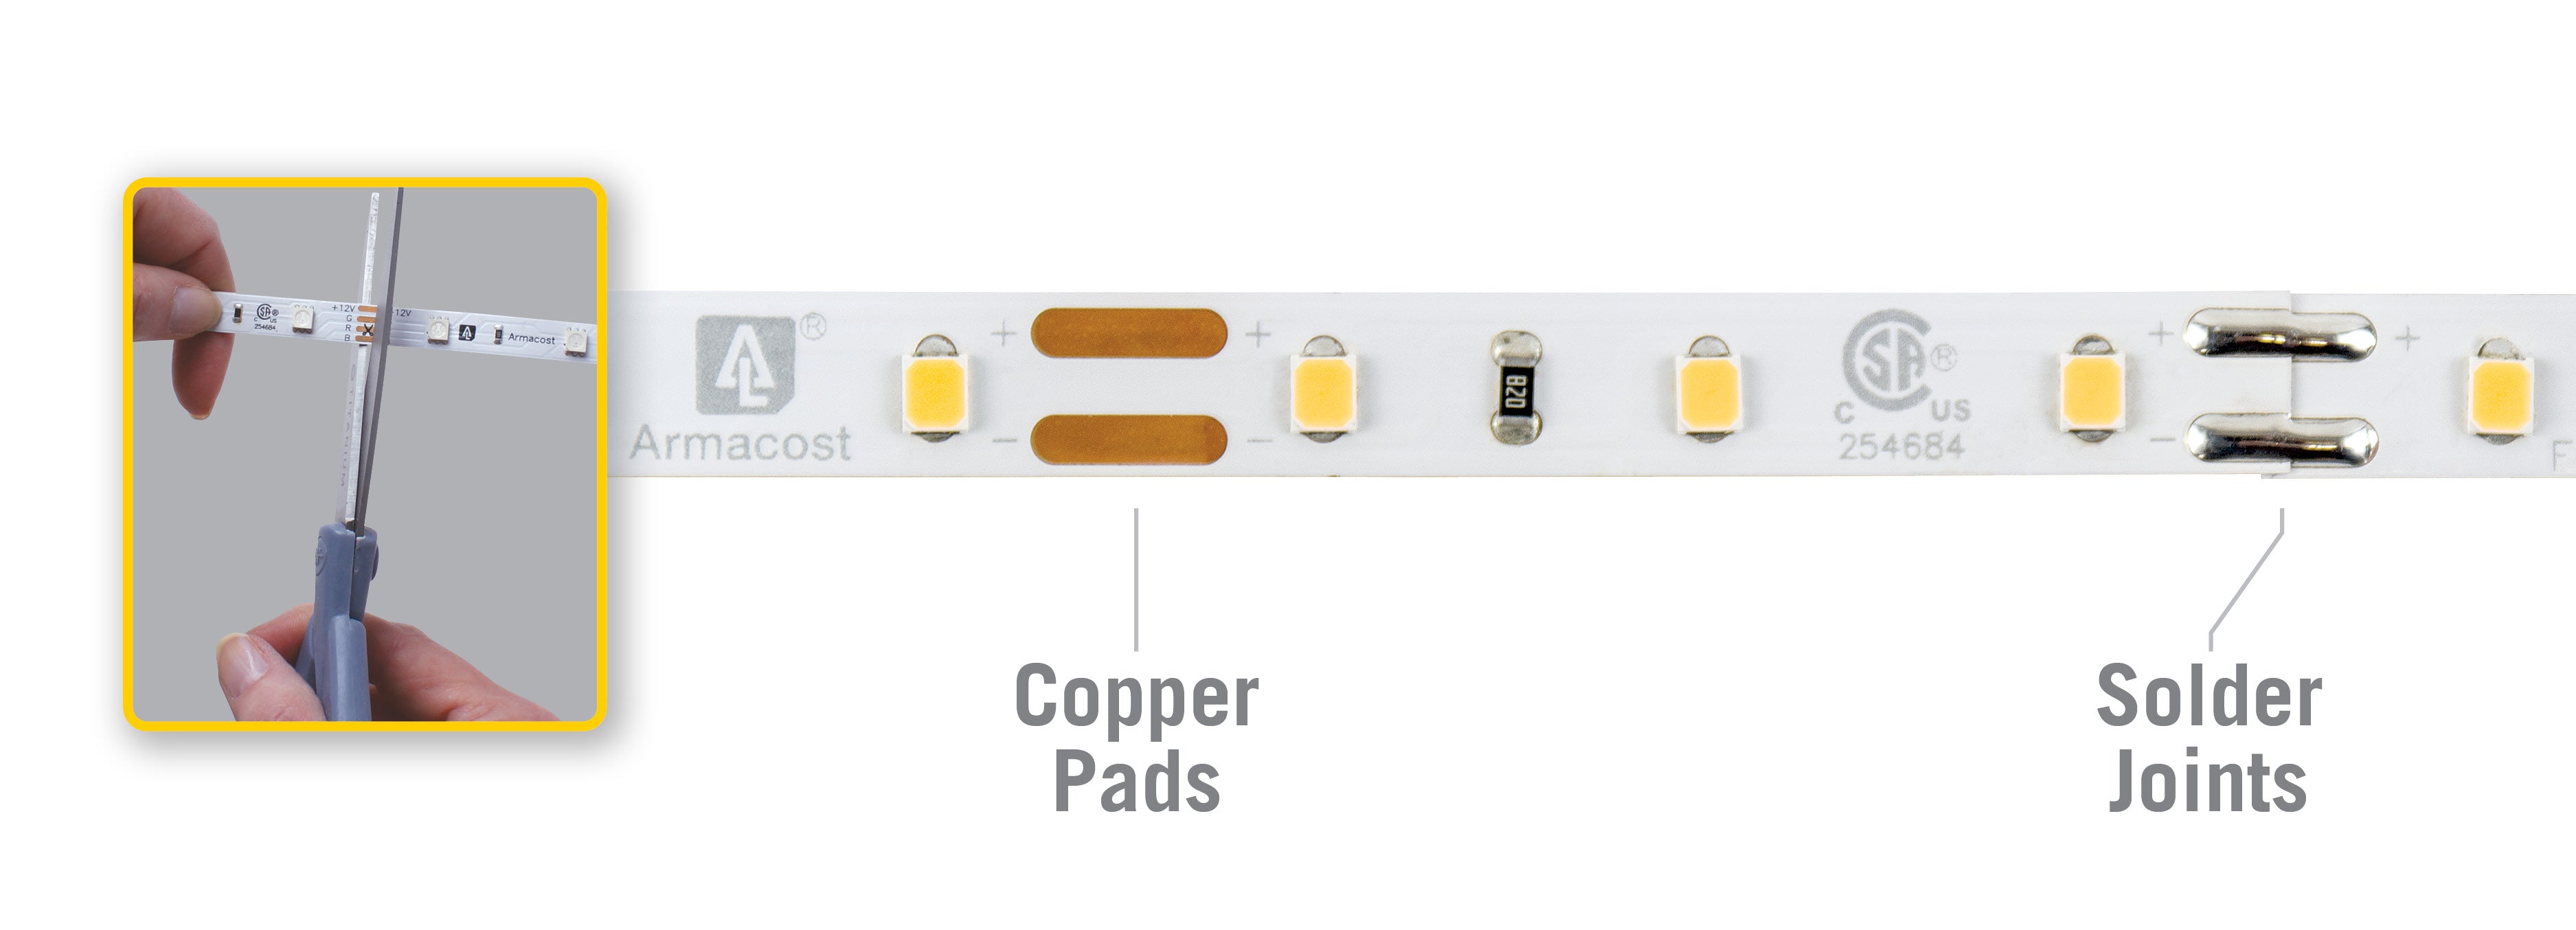 How To Cut And Connect Waterproof LED Strip Lights